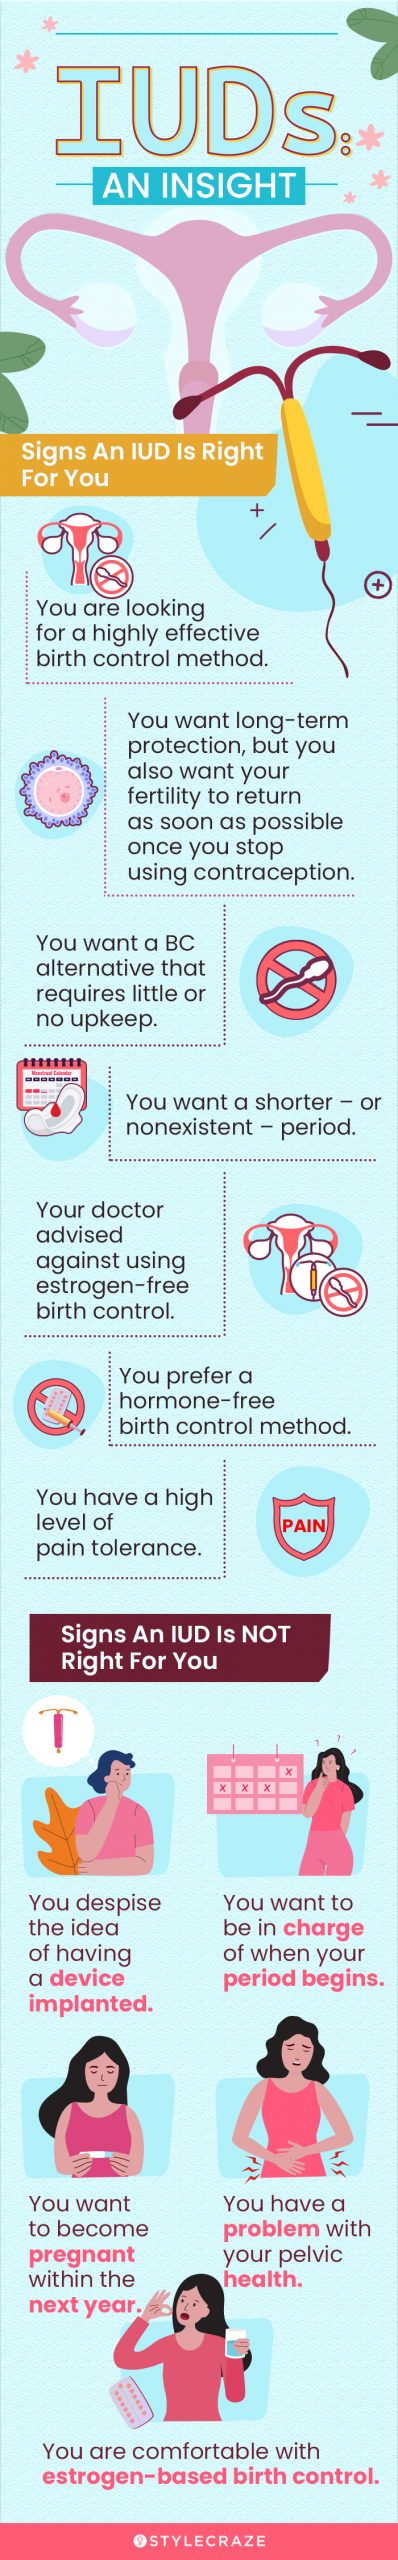 signs and iud is right for you [infographic]